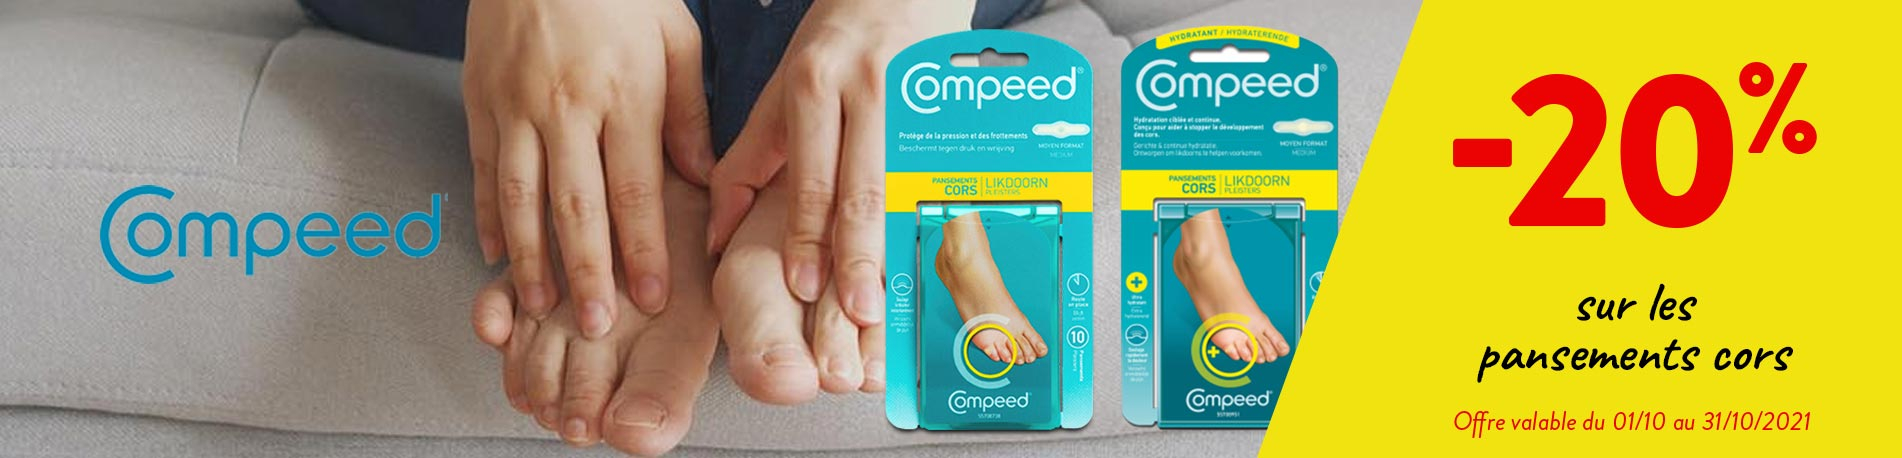 Promotion Compeed cors